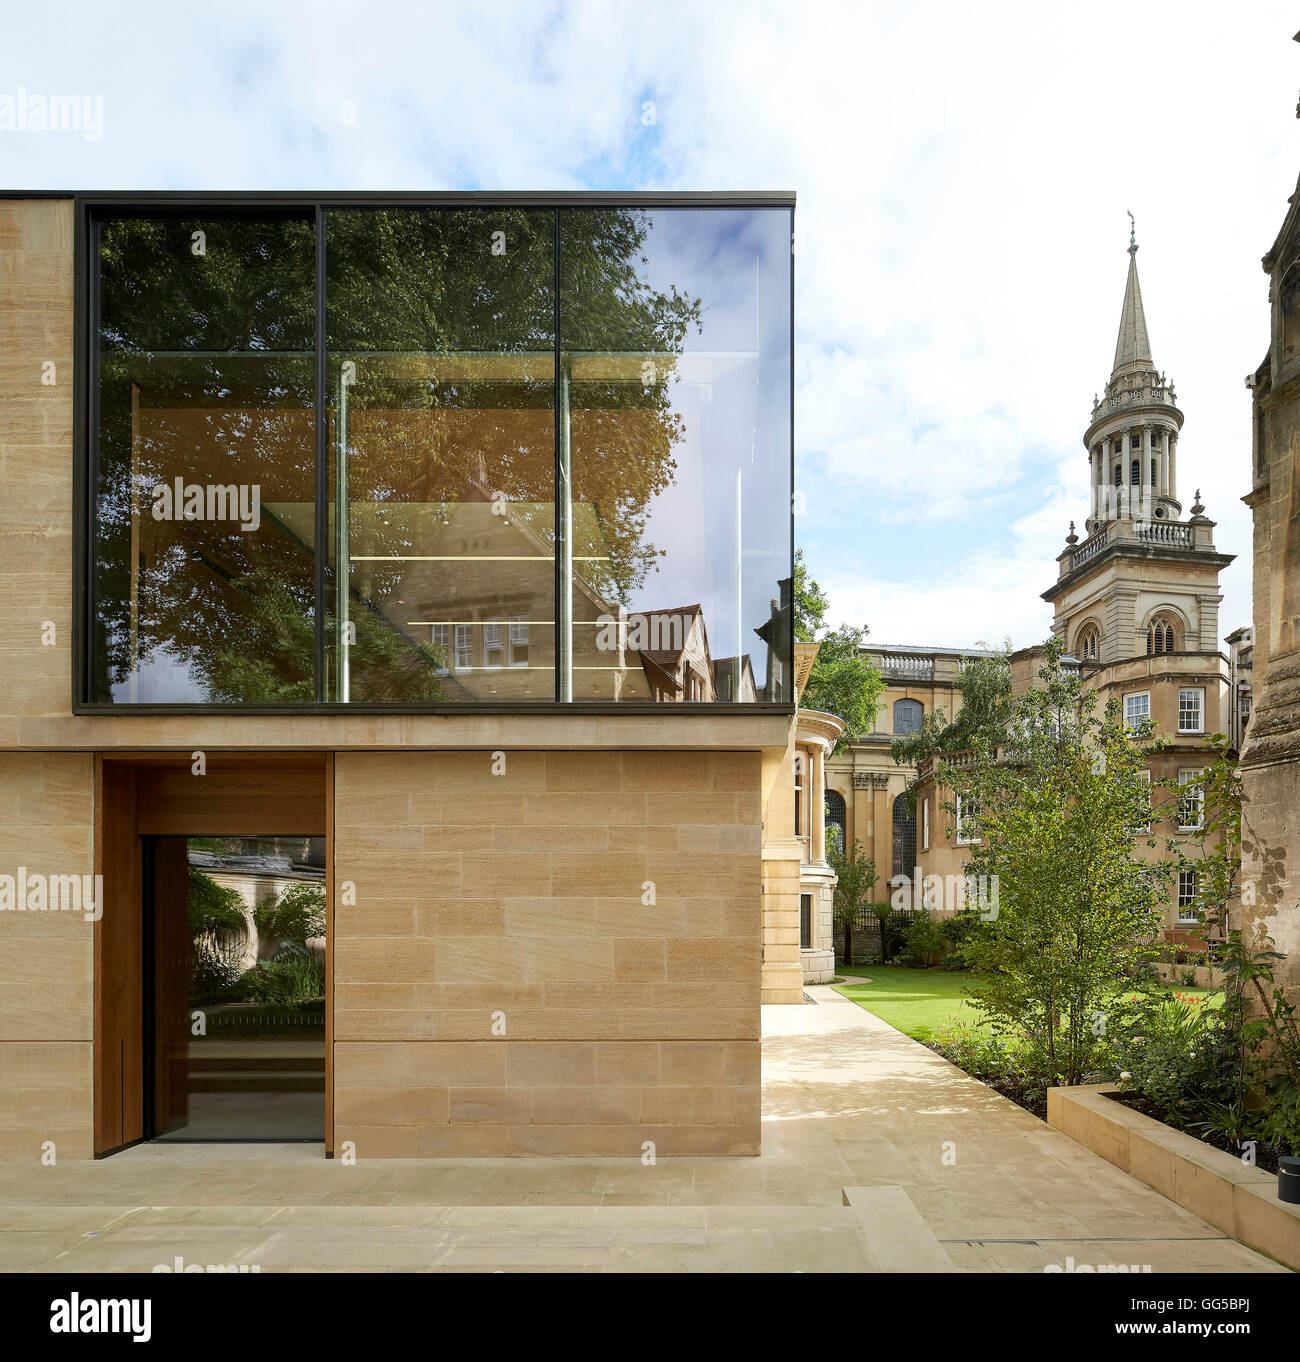 Modern Garden Building within its historic college context. The Garden Building  at Lincoln College, Oxford, United Kingdom. Architect: Stanton Williams, 2015. Stock Photo